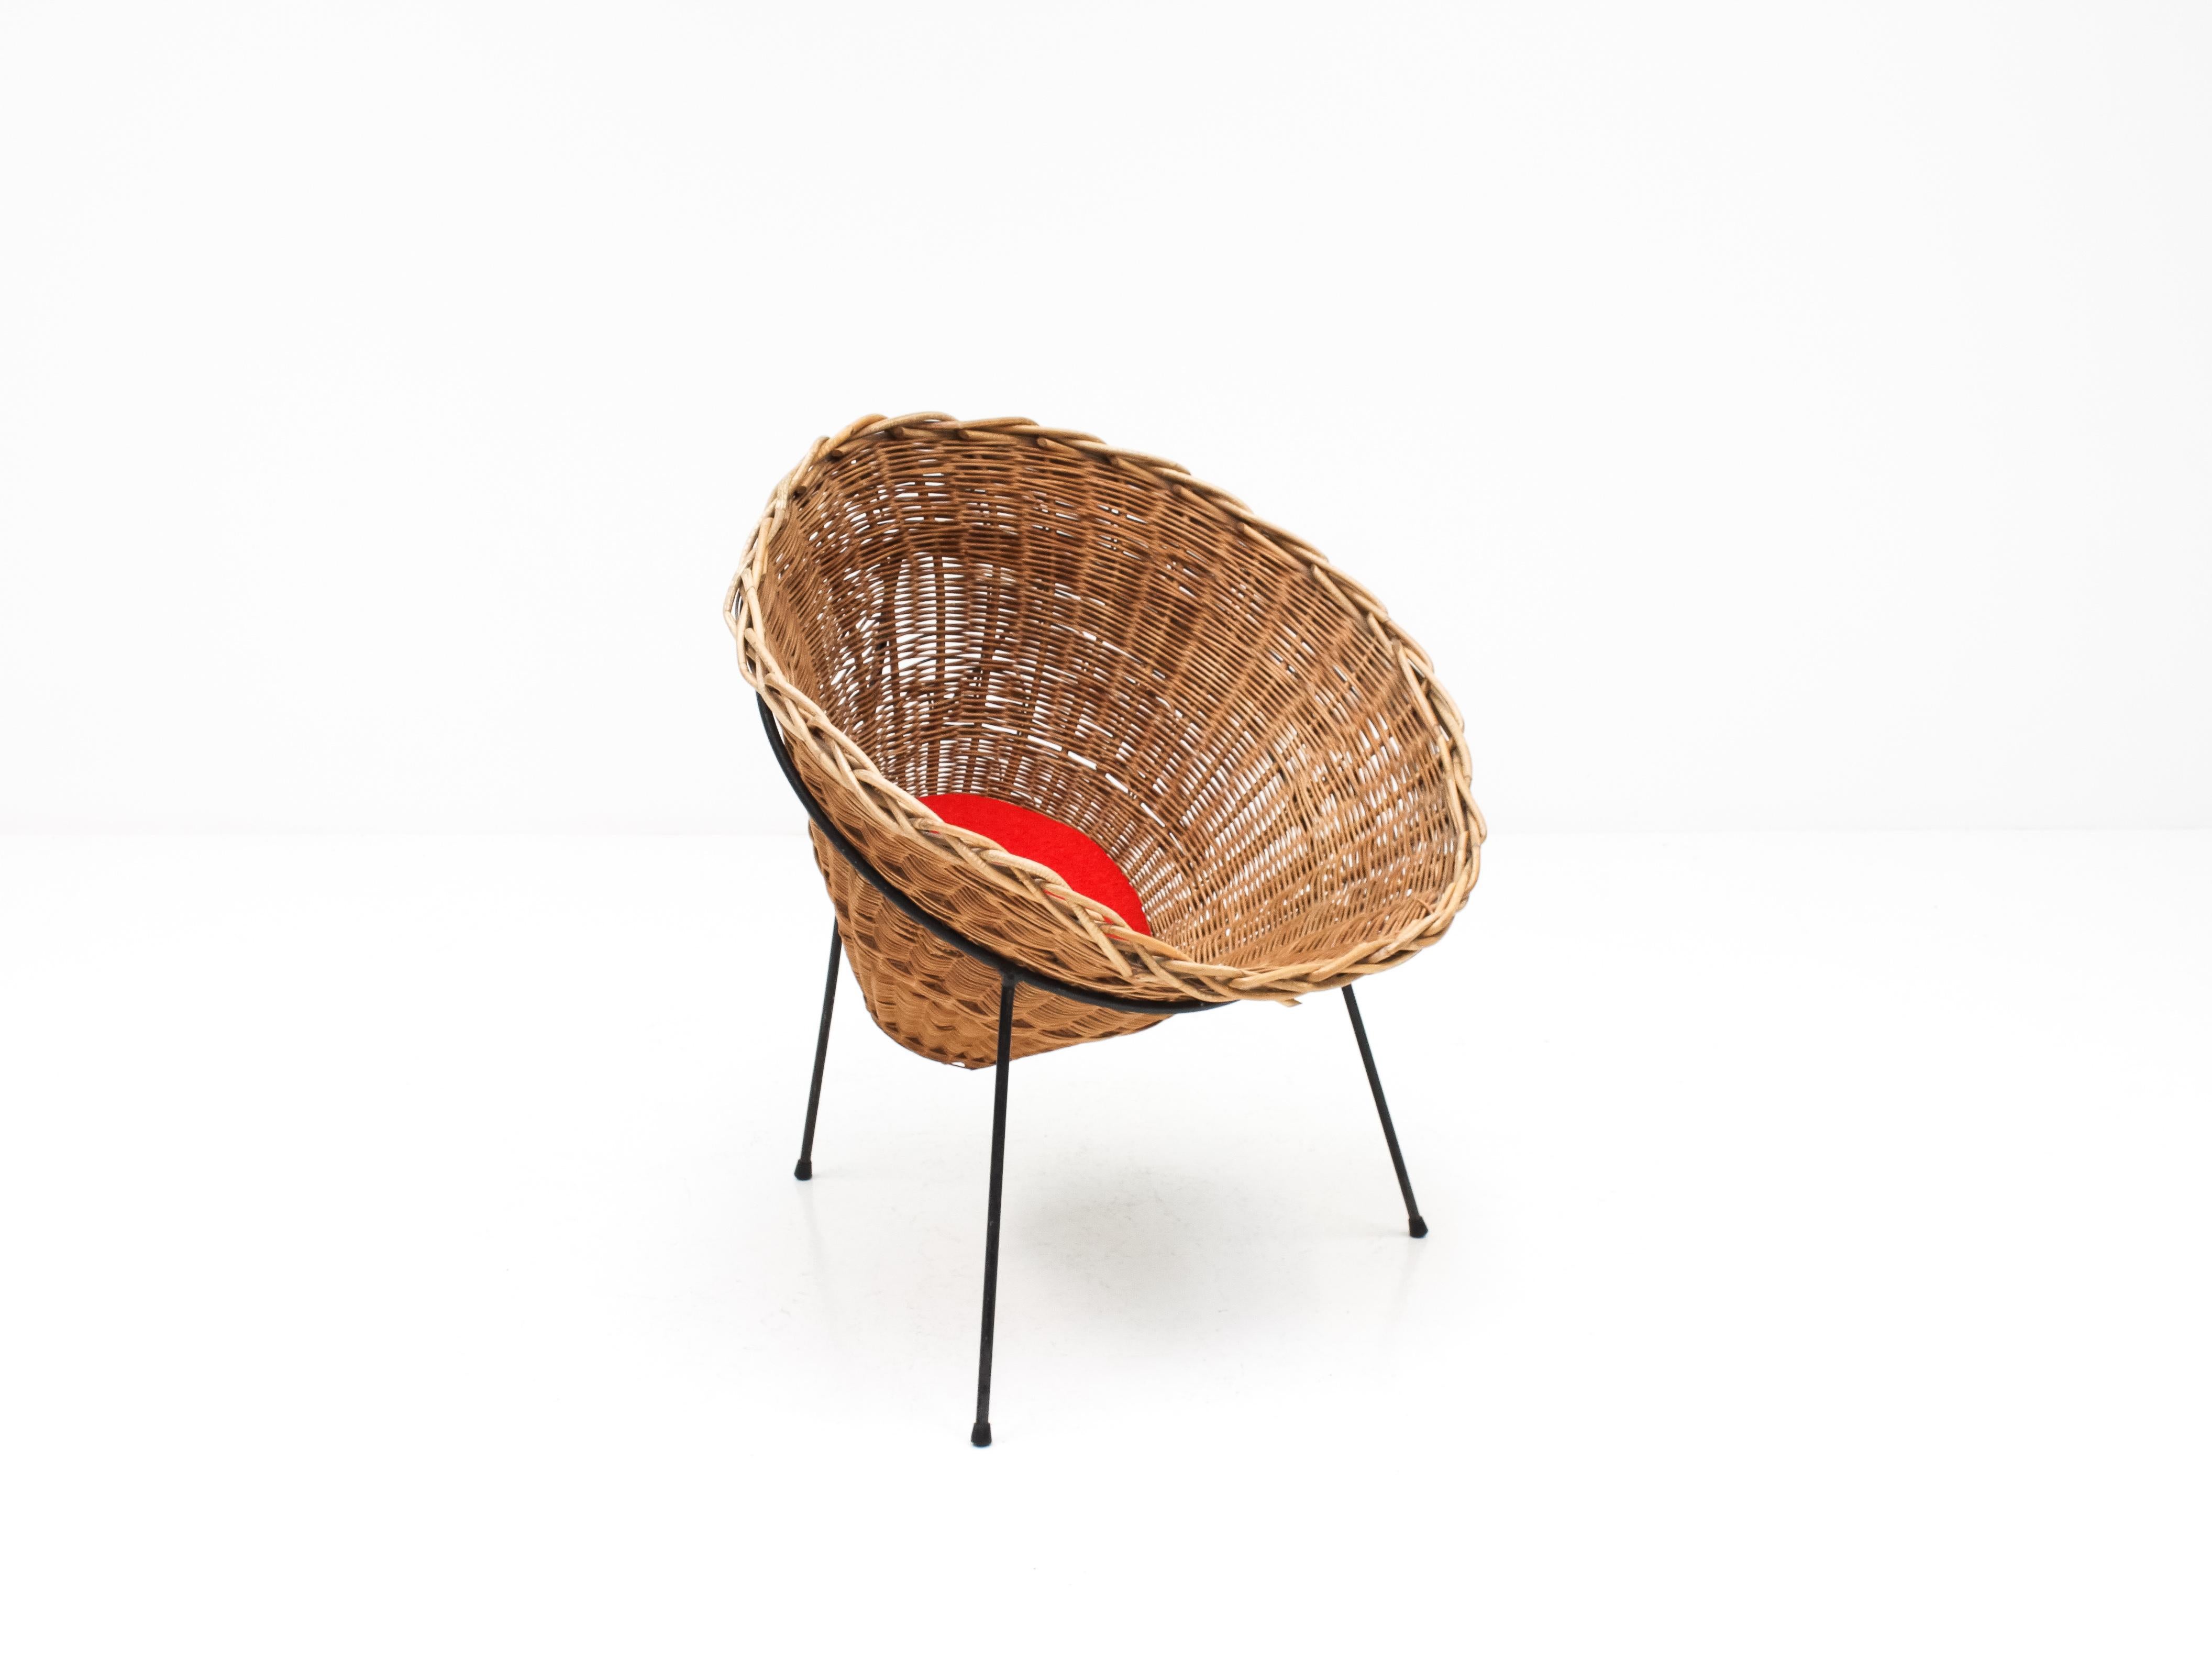 A Terence Conran C8 cone chair, Conran Furniture, England, 1954.

A seldom found Terence Conran C8 cone chair. Dating from 1954 this is an early example which was produced by Conran Furniture.

The willow basket weave sits on a tripod steel rod